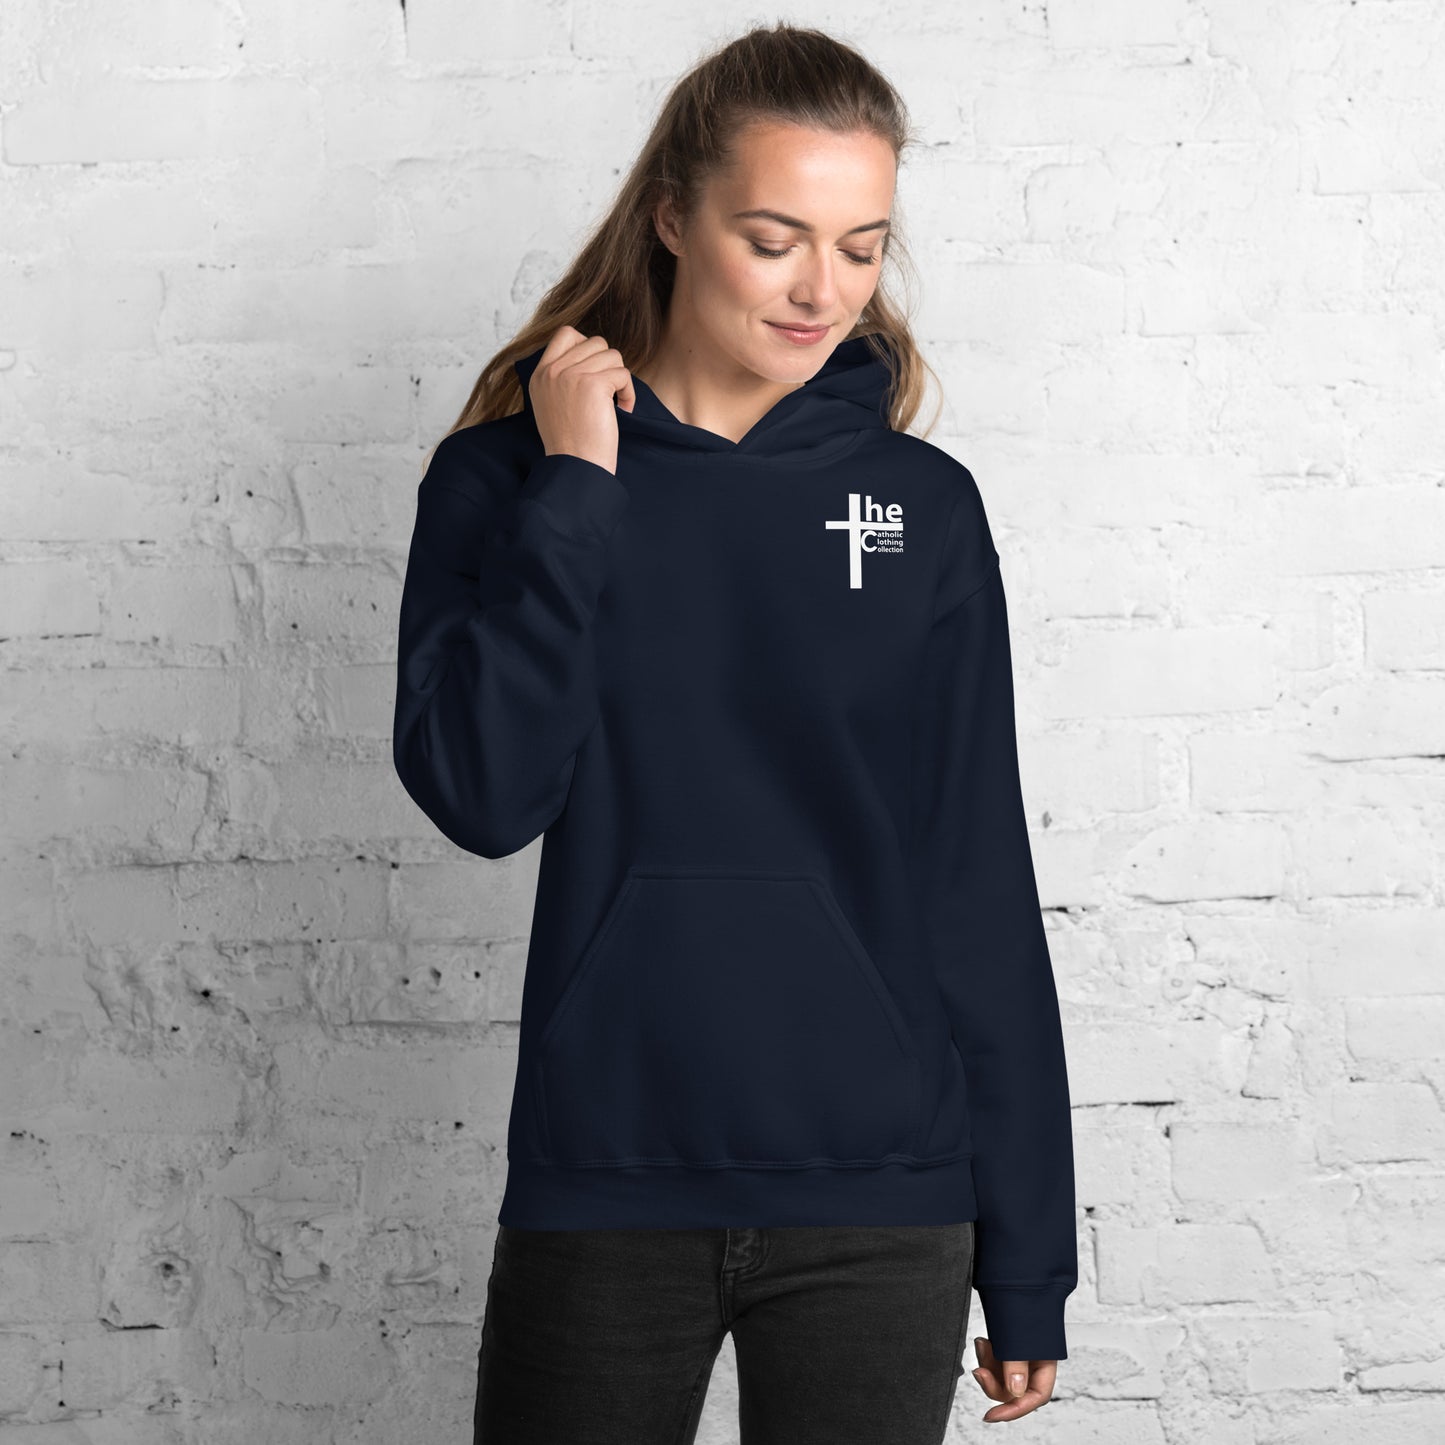 Our Lady of Lourdes Women's Hoodie